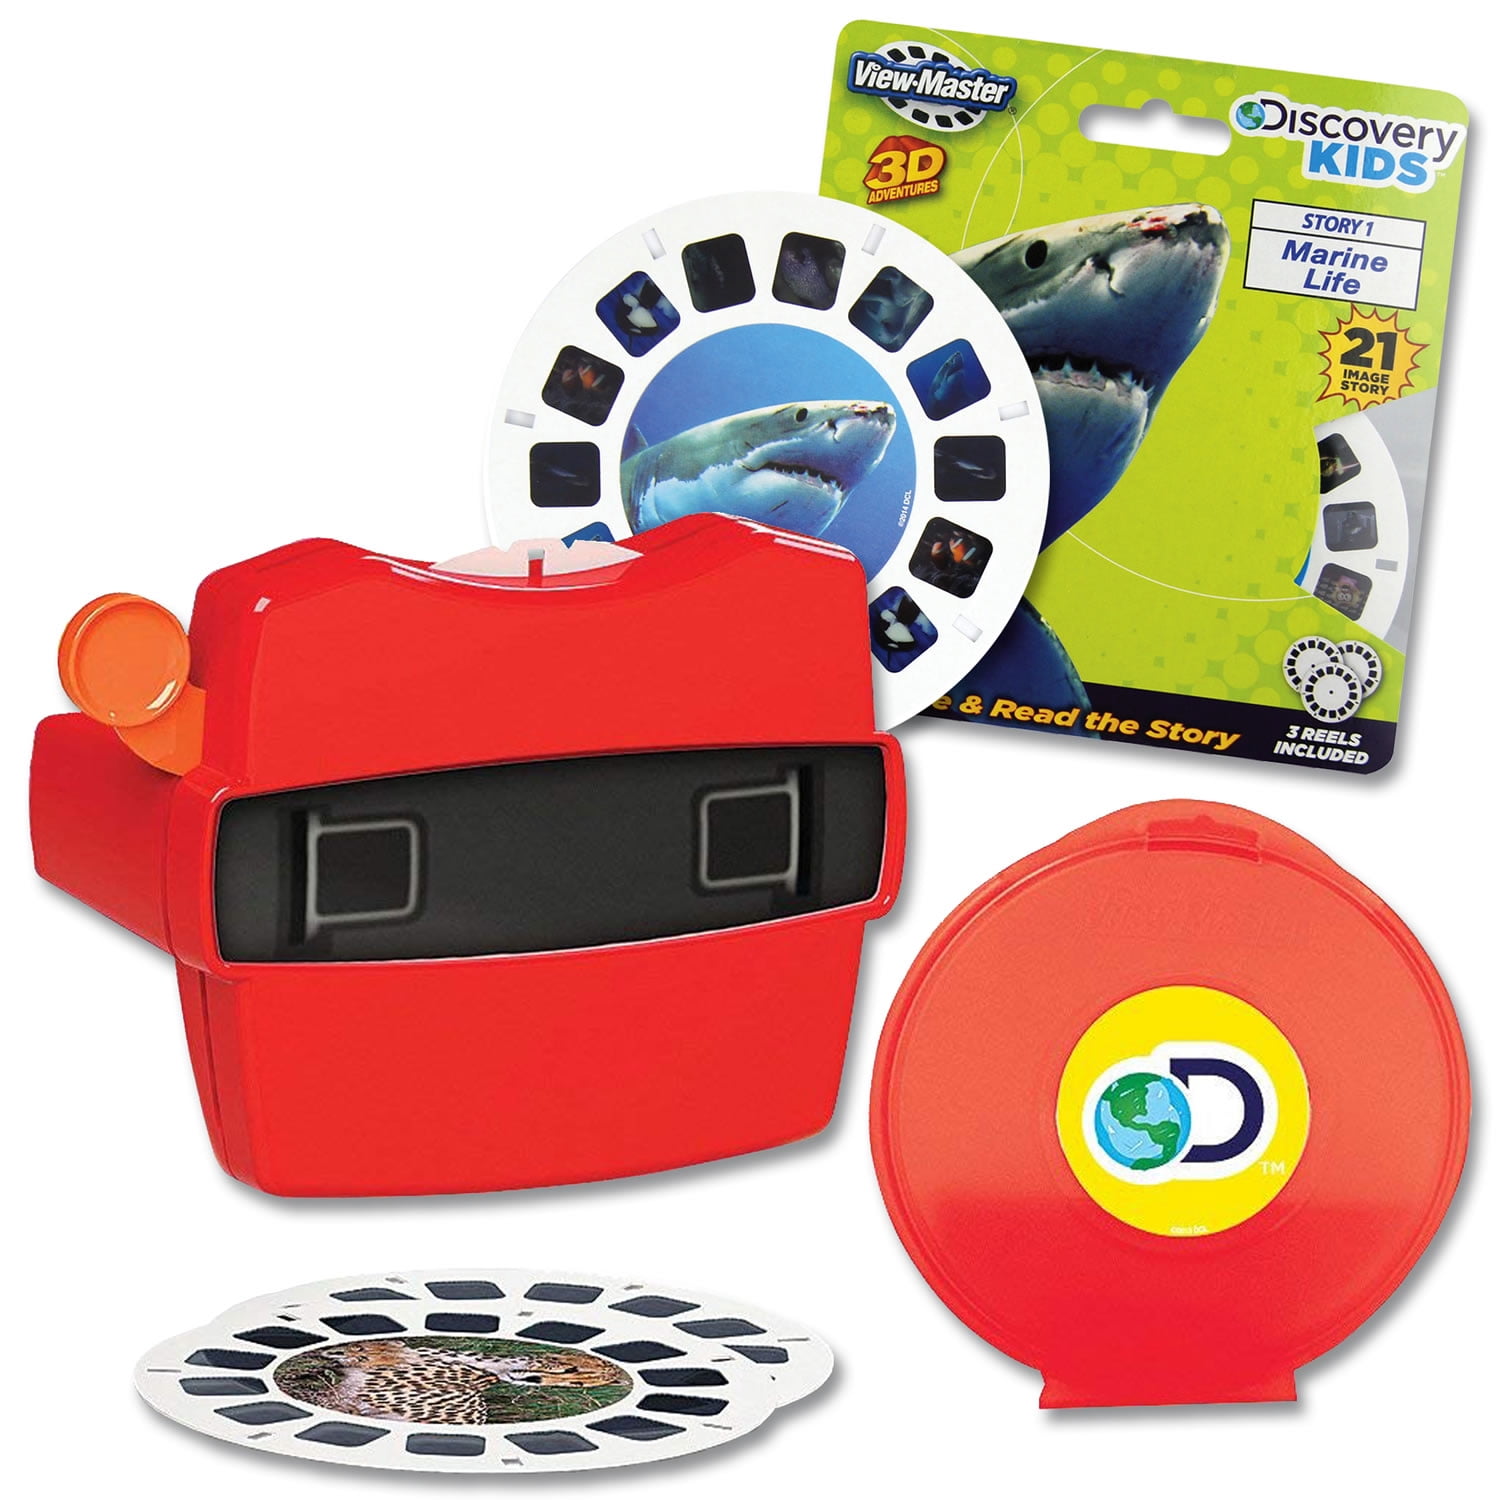 Toy Reel Viewer - Virtual Reality Viewer - Toy Photo Viewer digital clip art